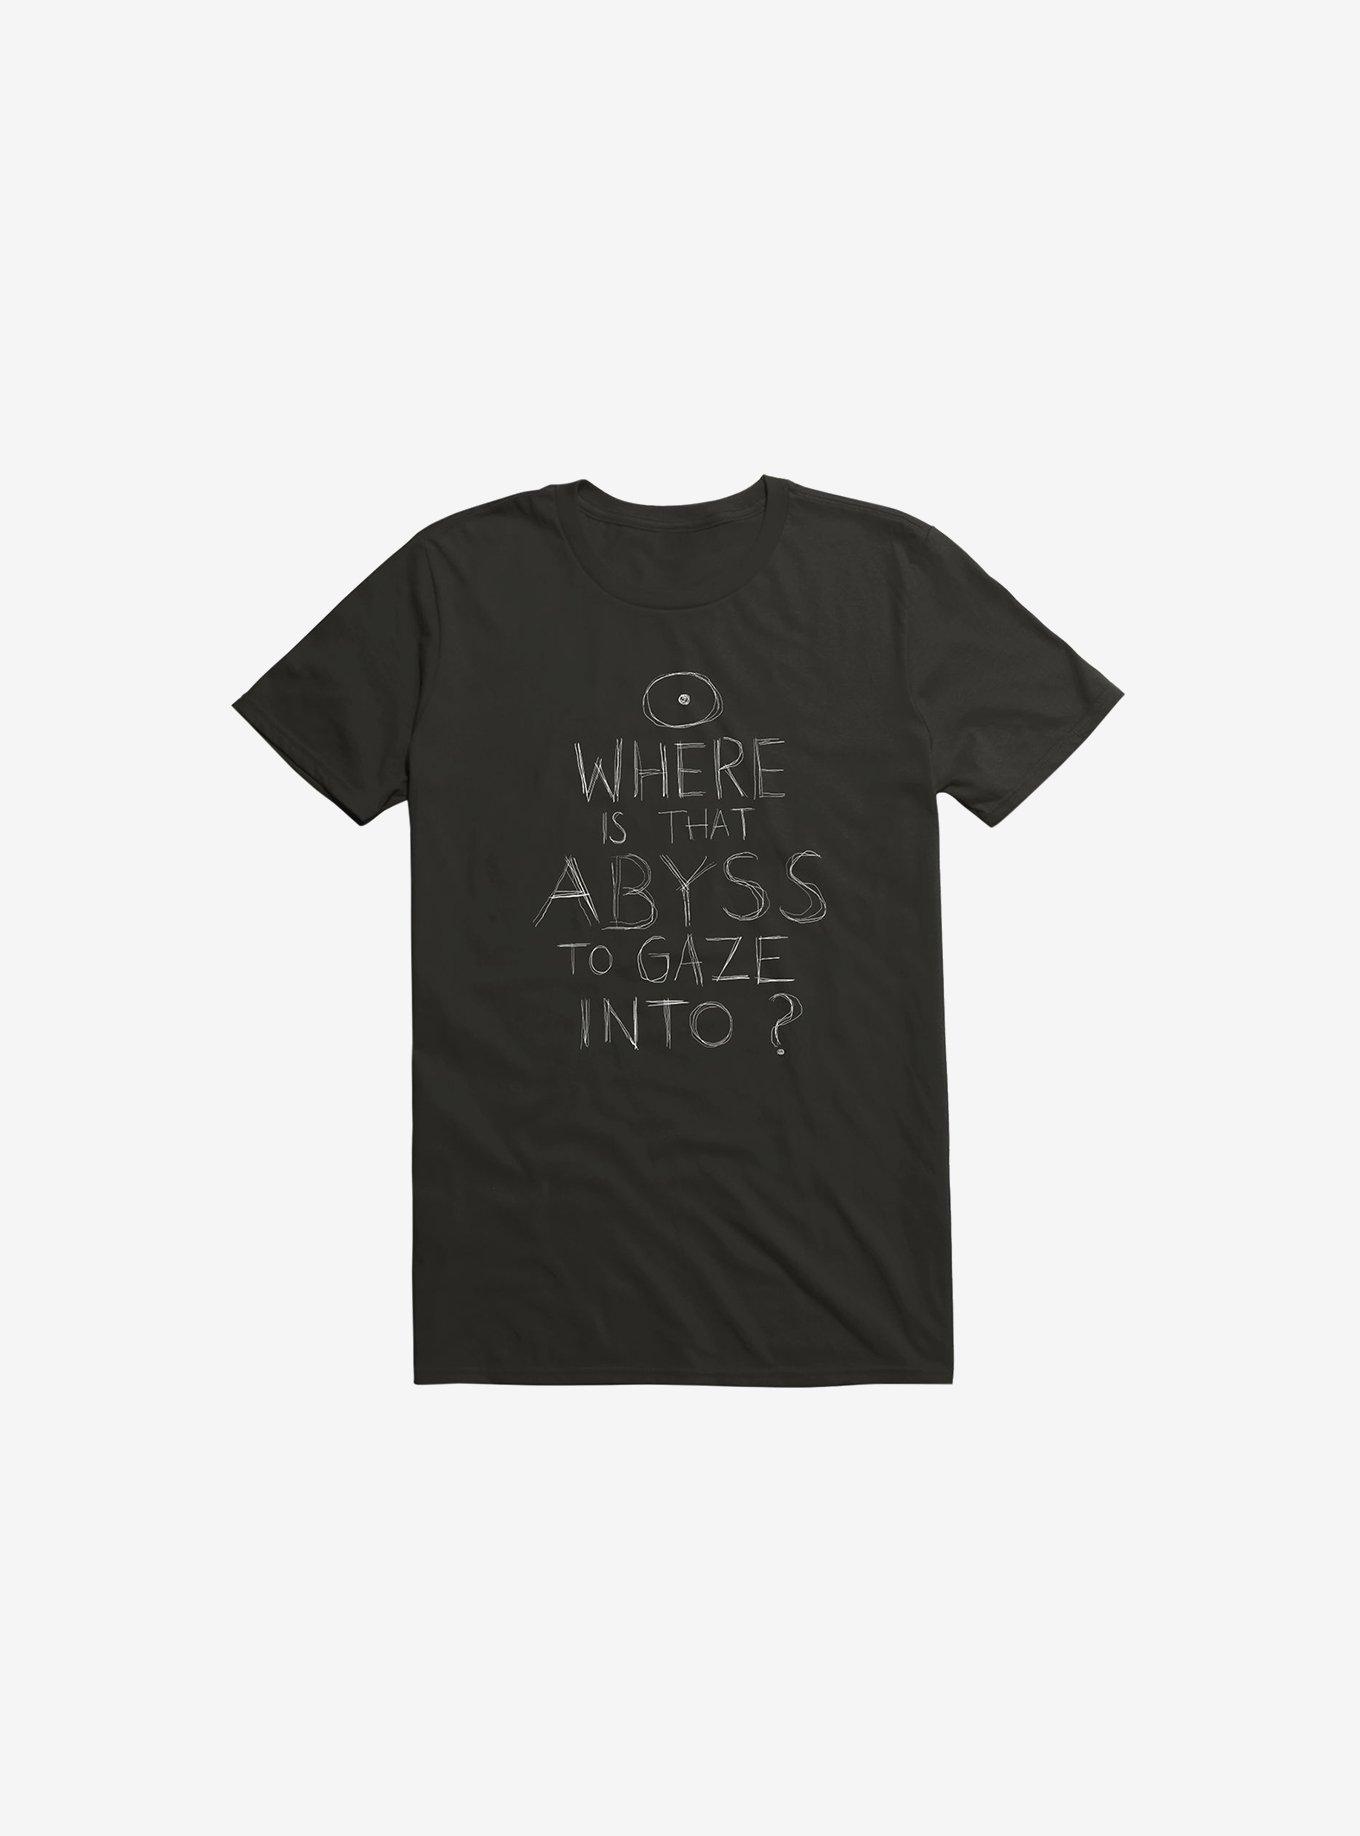 Where Is That Abyss To Gaze Into? T-Shirt, BLACK, hi-res